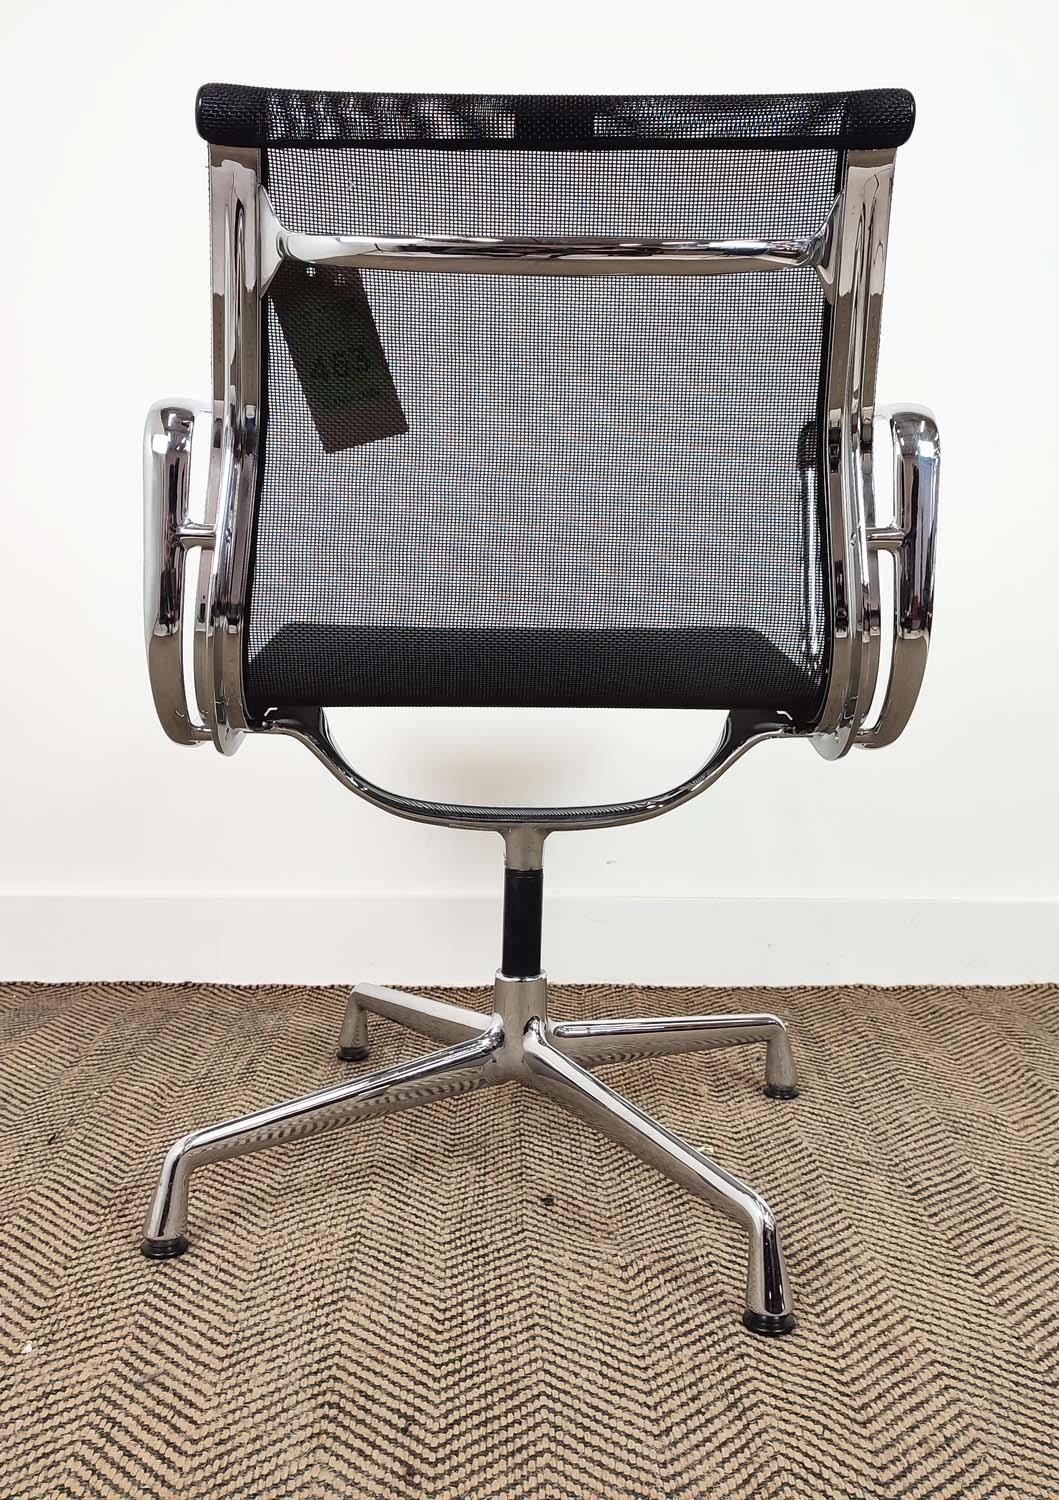 VITRA ALUMINIUM GROUP CHAIR, designed by Charles and Ray Eames, 57cm W x 85cm H, bears label. - Image 4 of 6